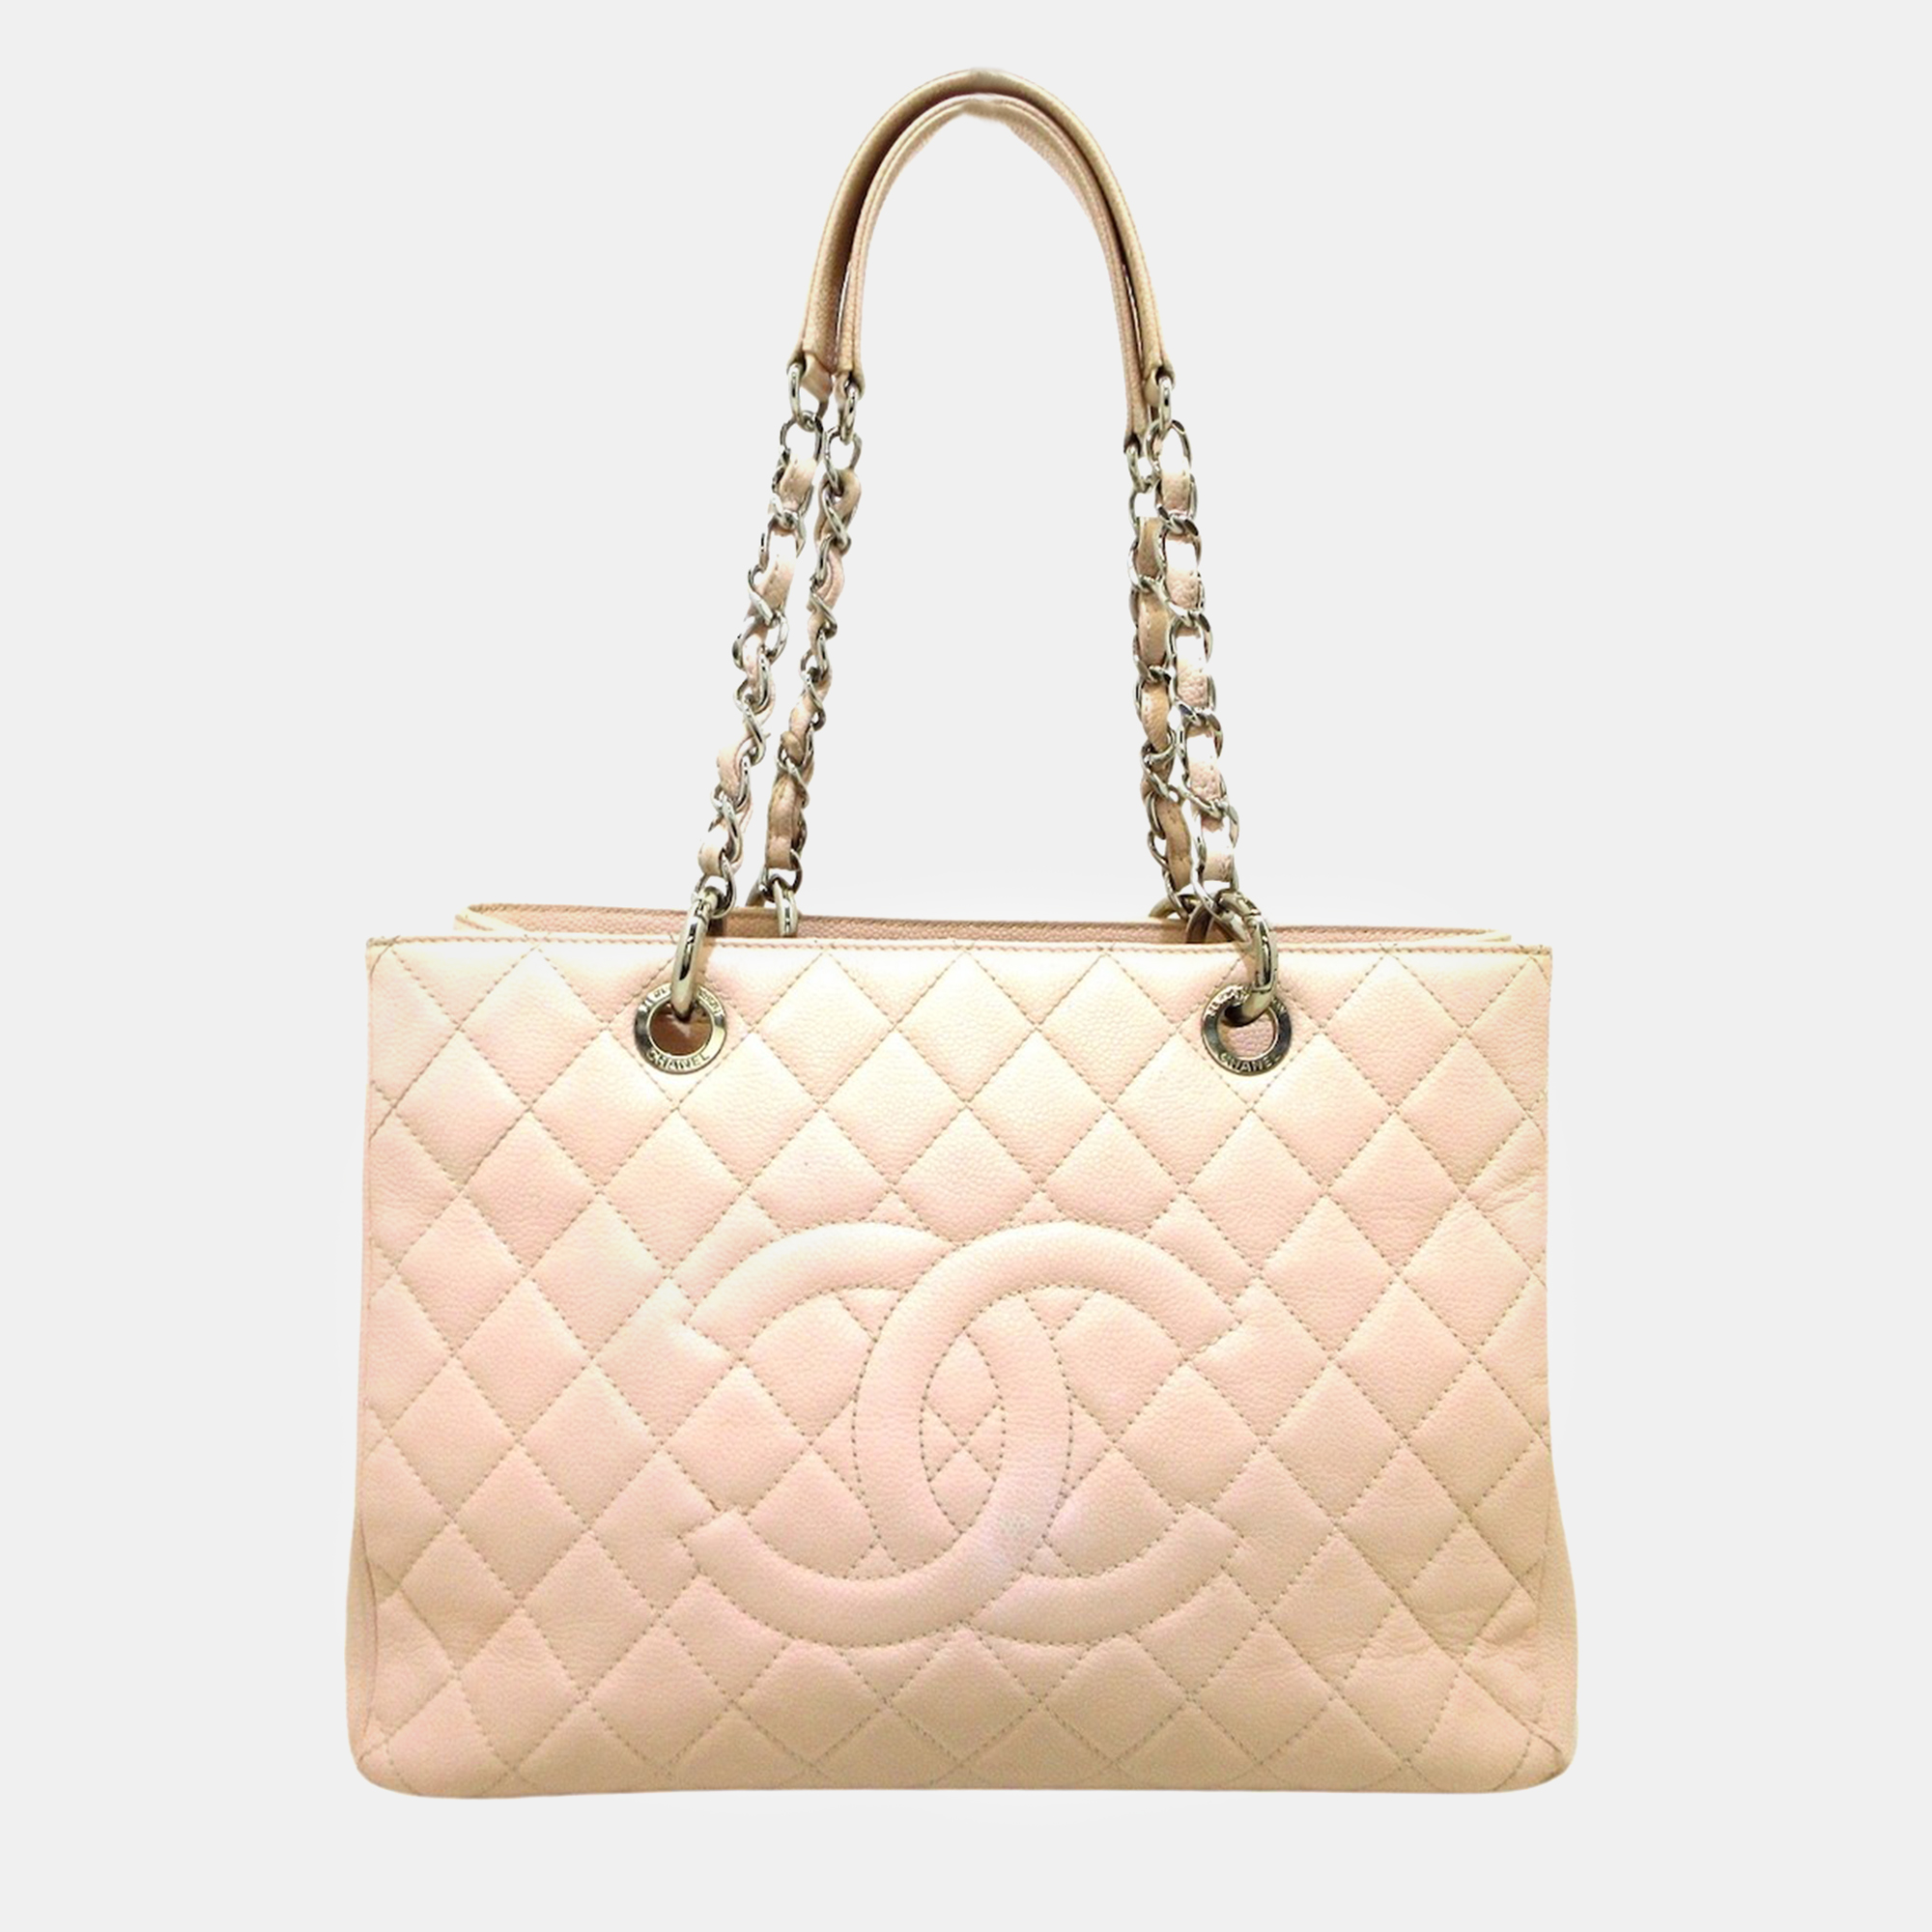 

Chanel Beige Caviar Leather GST Totes